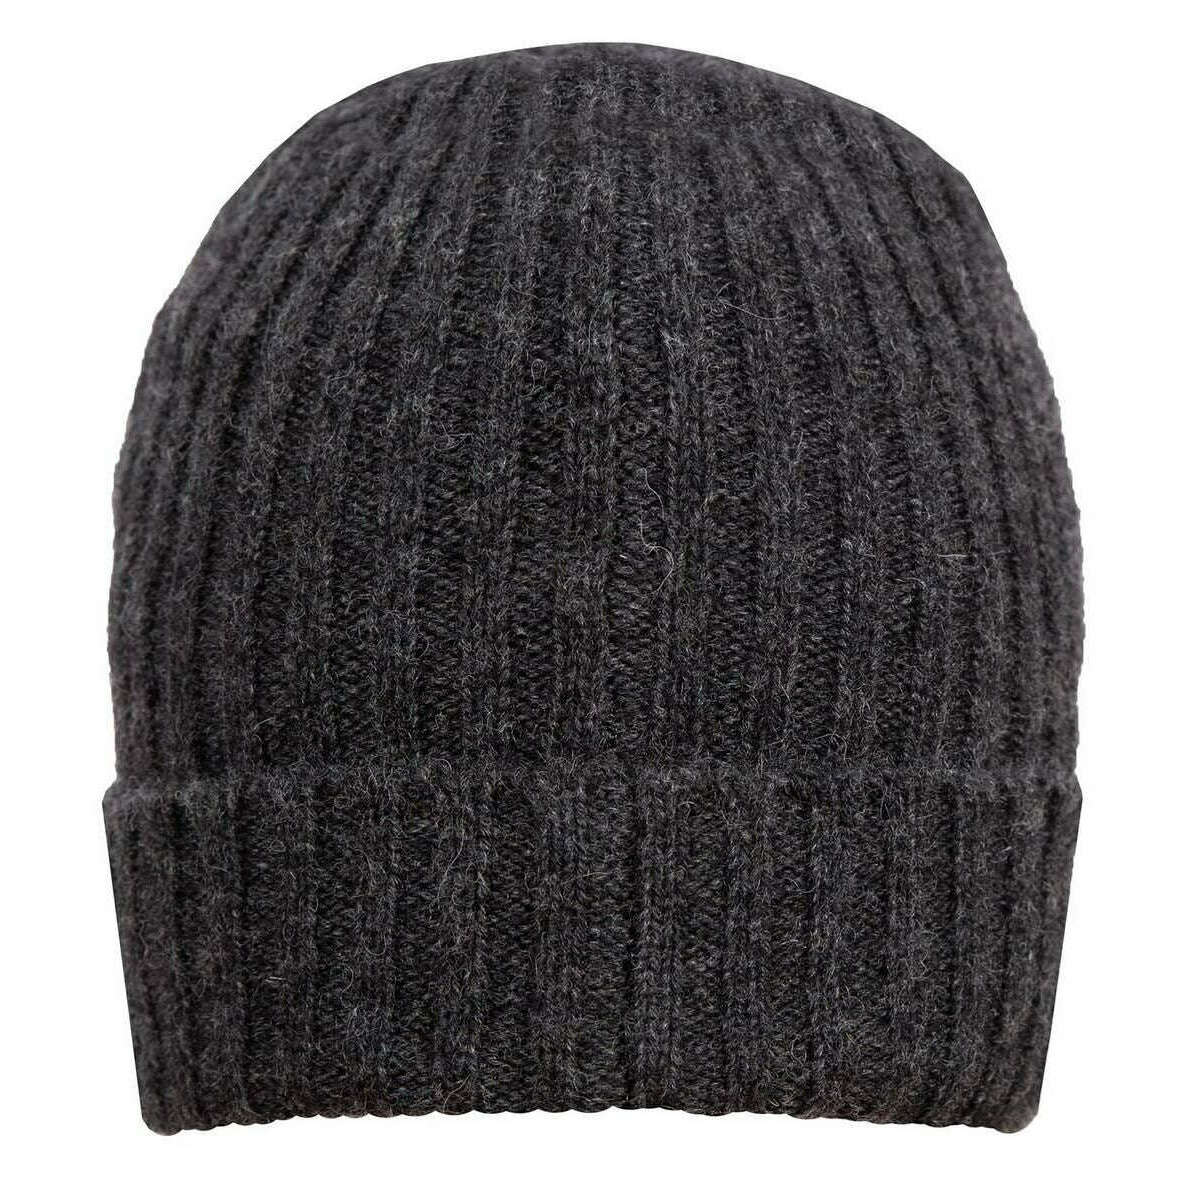 Dents Rib Knit Thinsulate-Lined Beanie Hat - Charcoal Grey